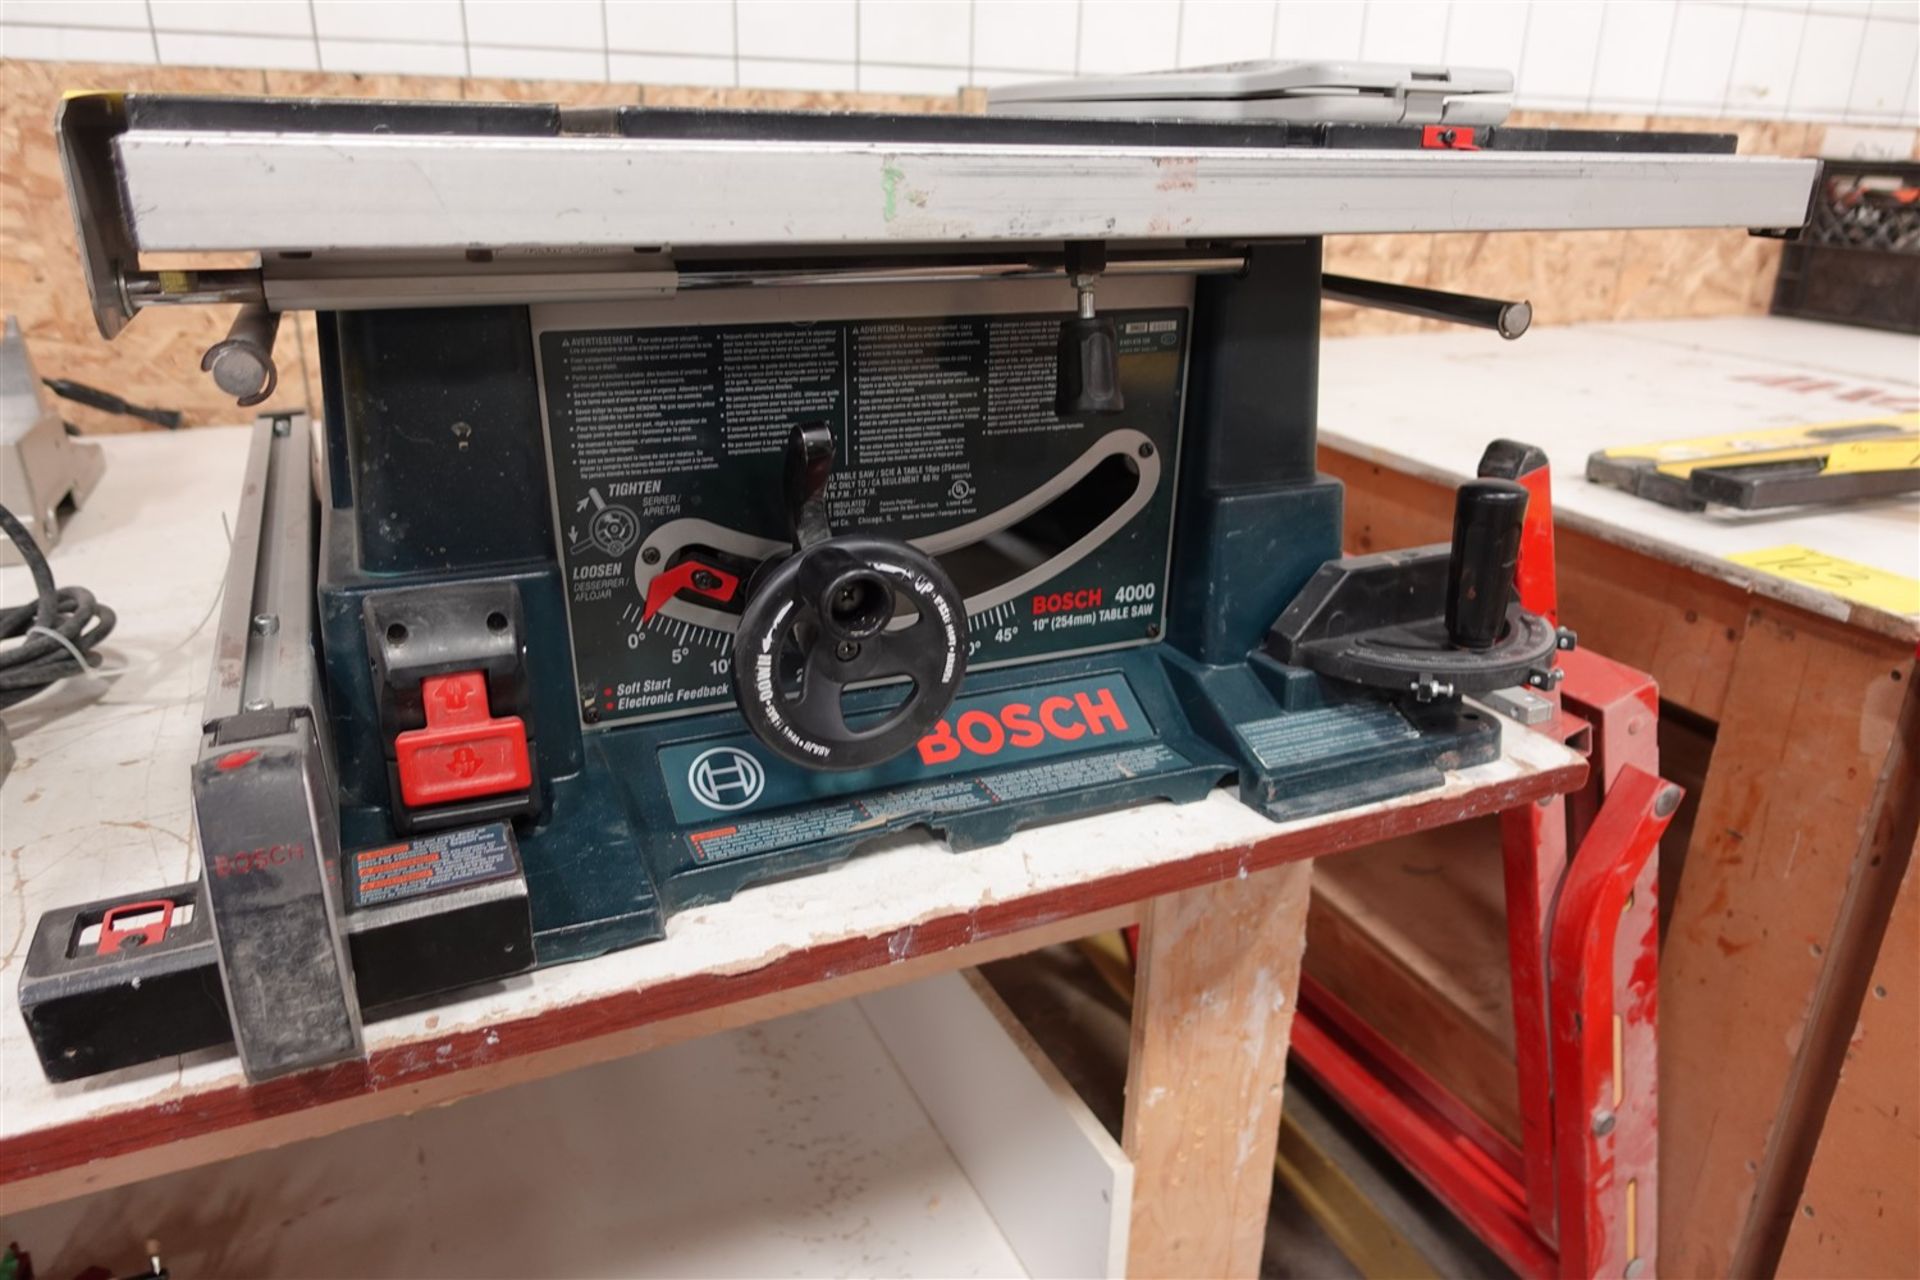 BOSCH 4000, 10” TABLE SAW W/ BOSCH FOLDING SAW STAND, MODEL TS1000 - Image 2 of 2